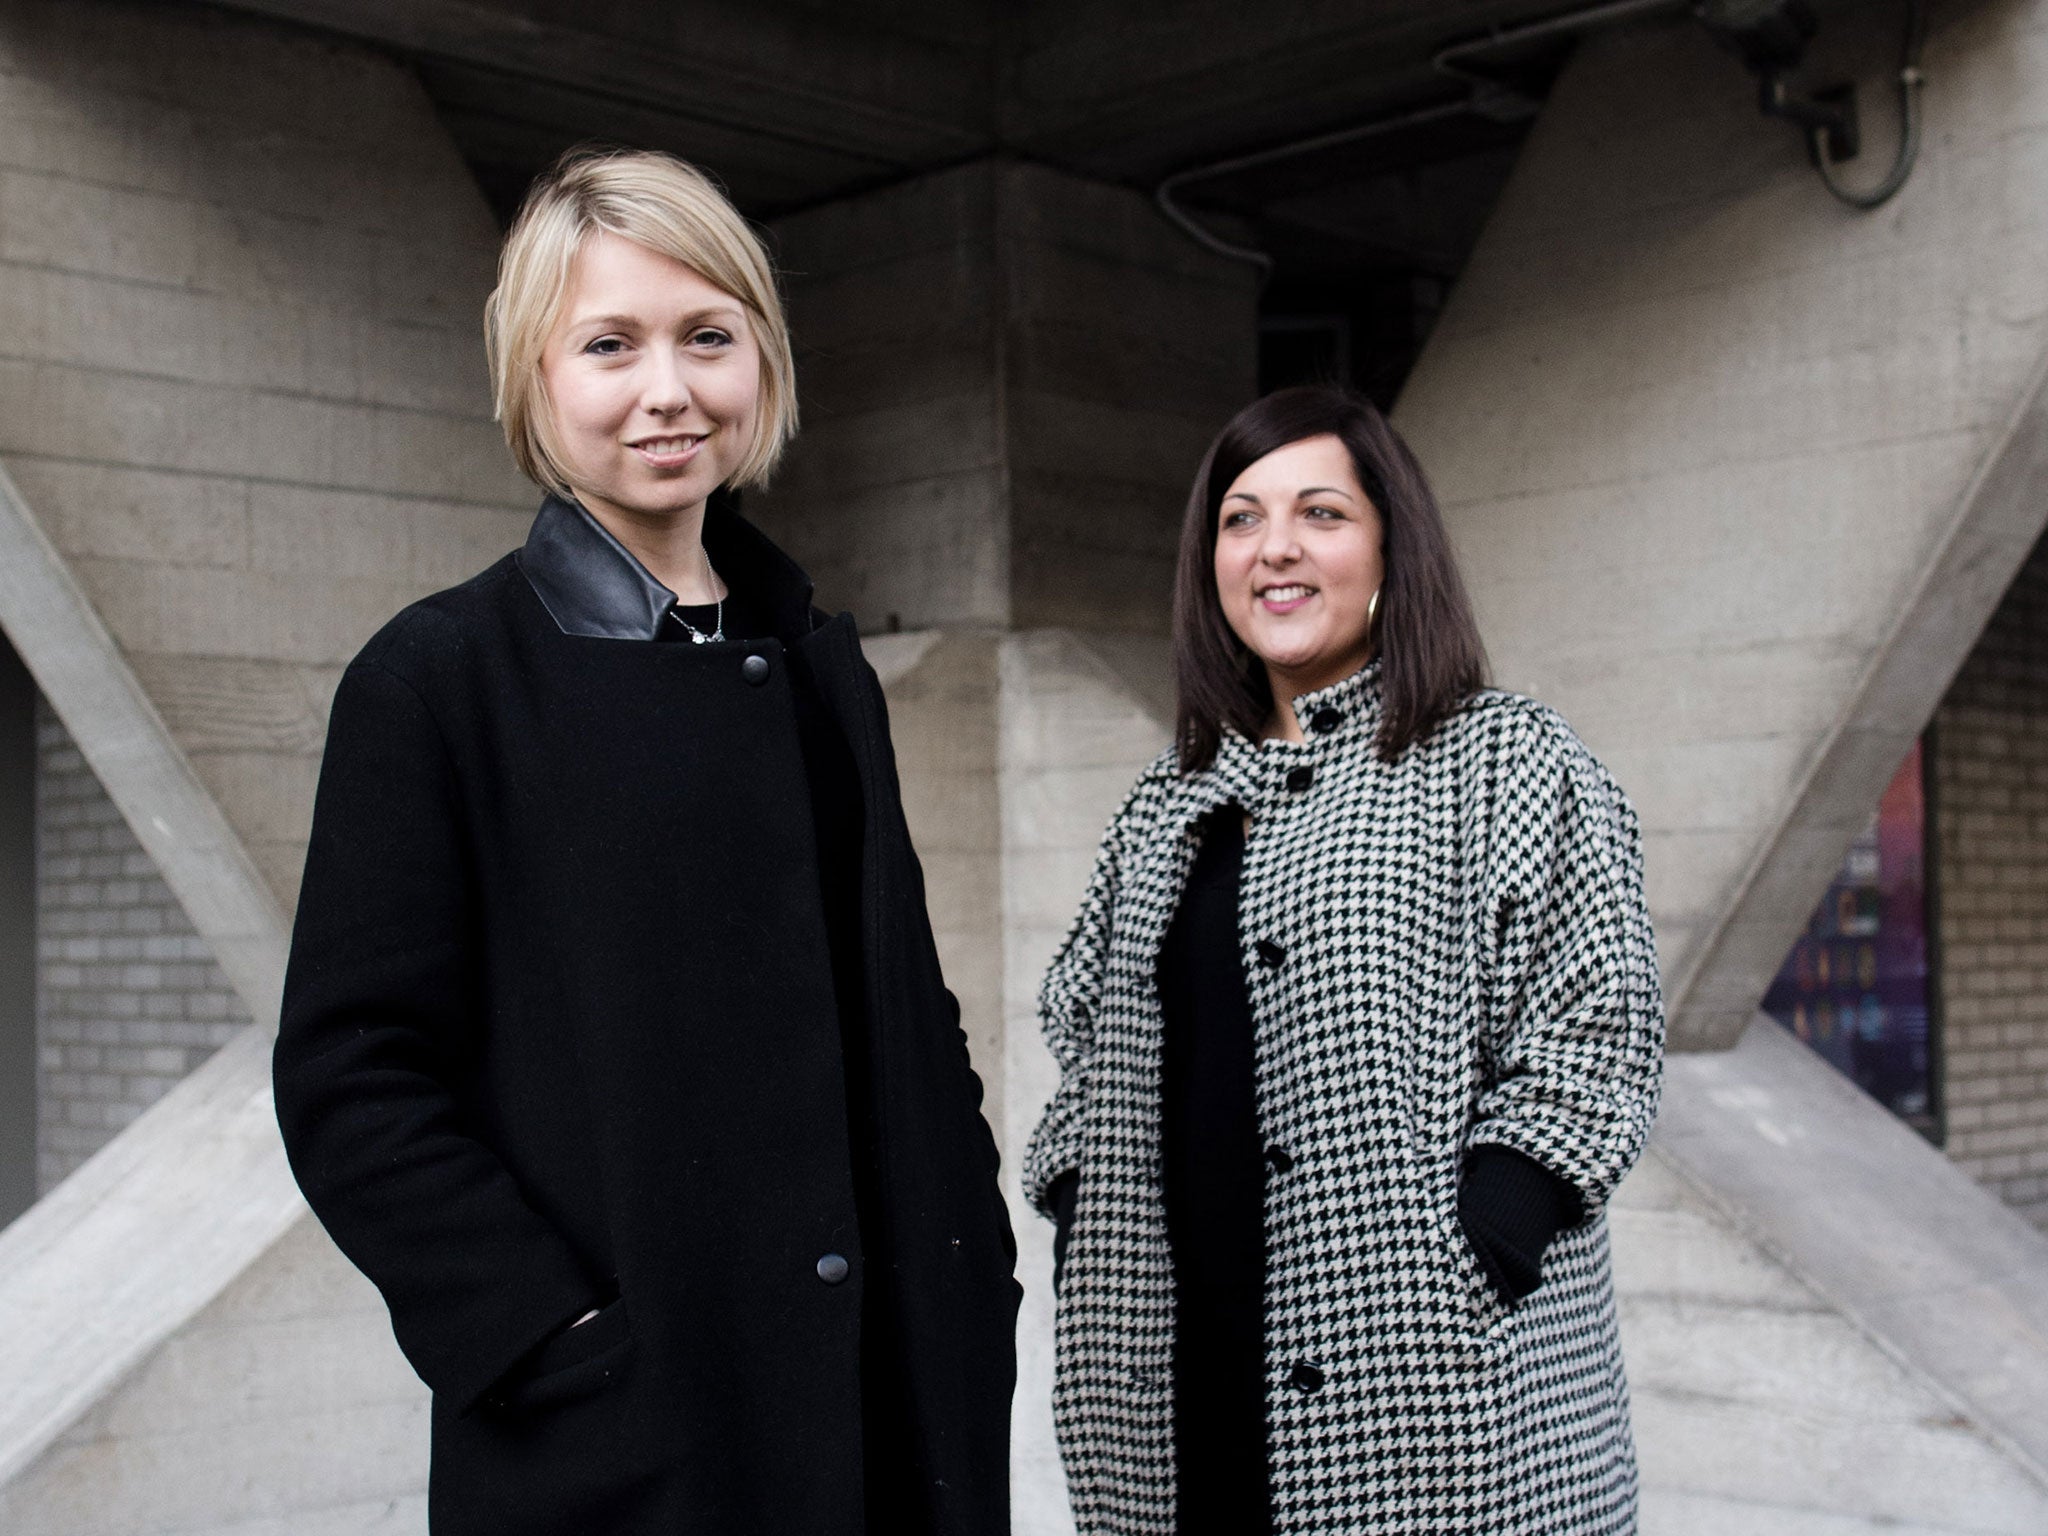 Polly Findlay (left) and Nadia Fall, two of theatre's most exciting directors